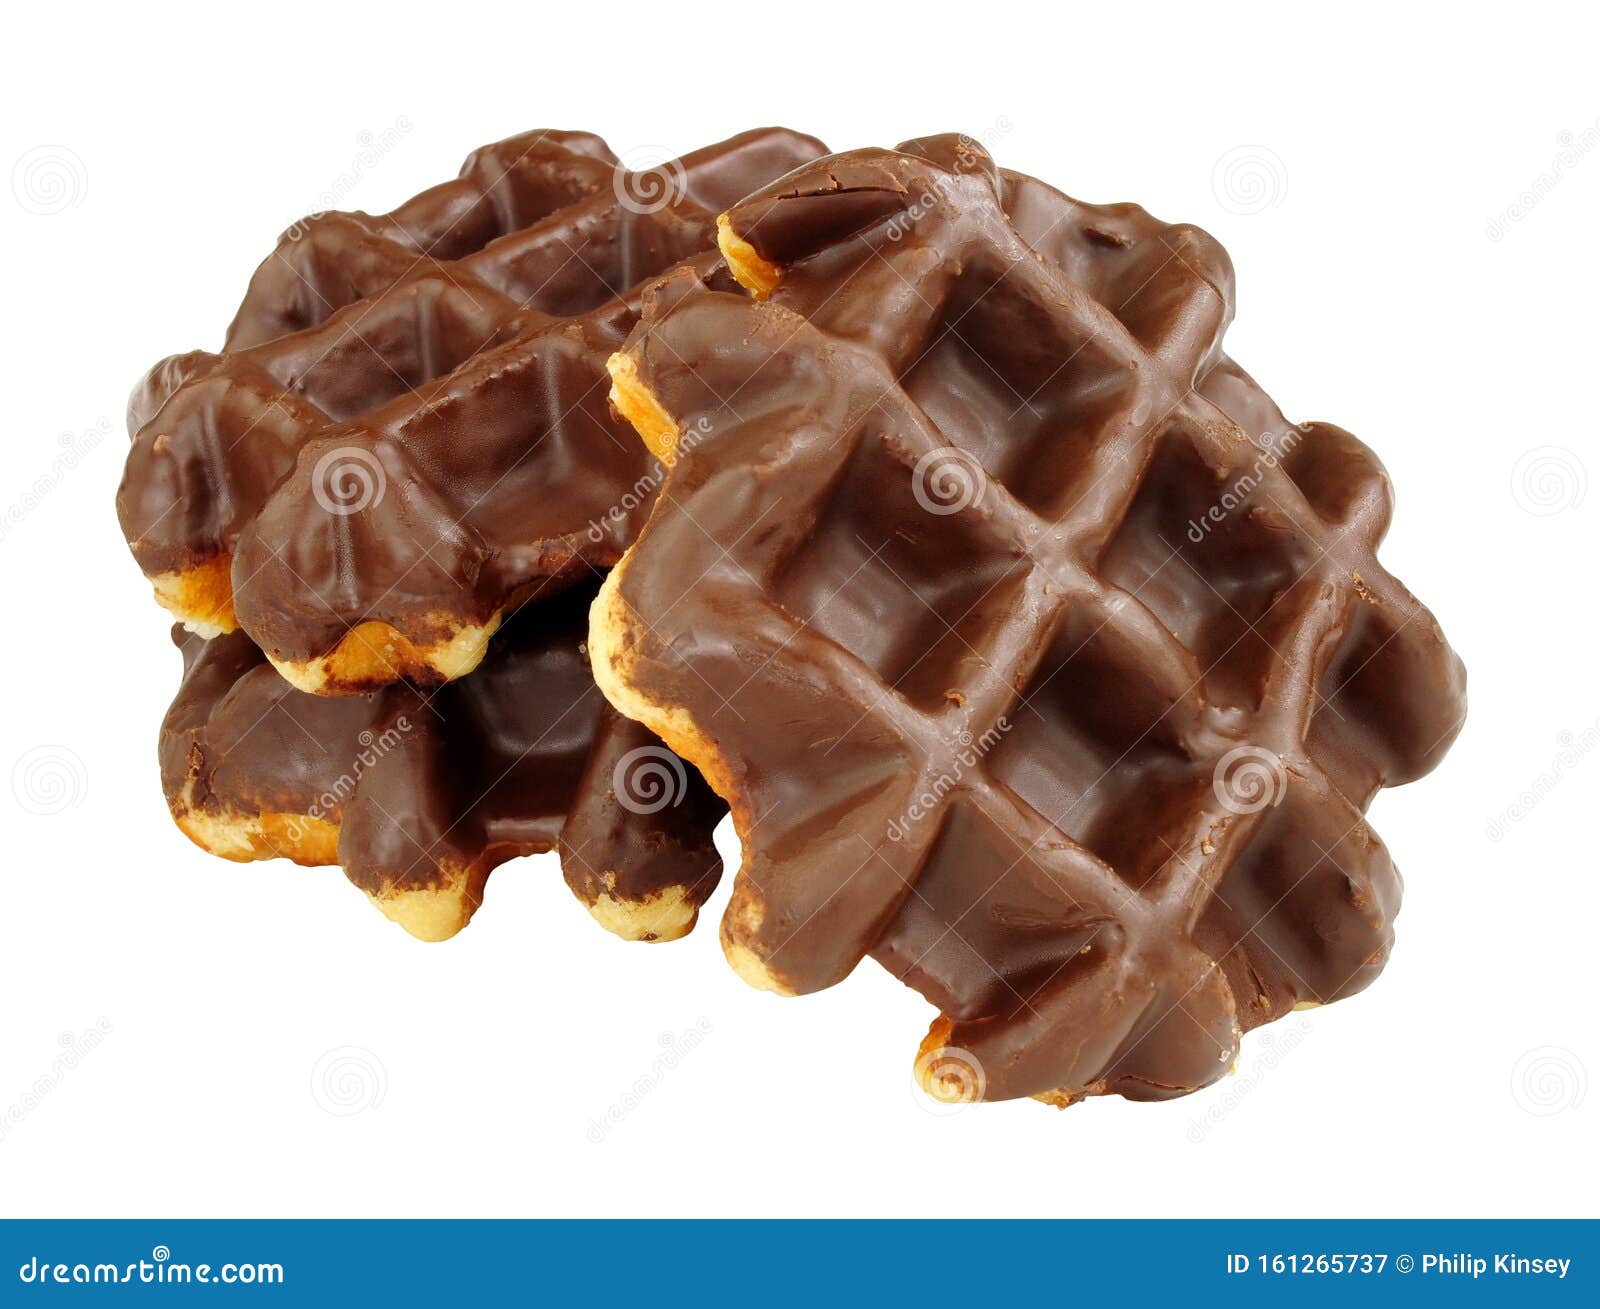 Group Of Chocolate Covered Waffles Stock Image - Image of covered ...